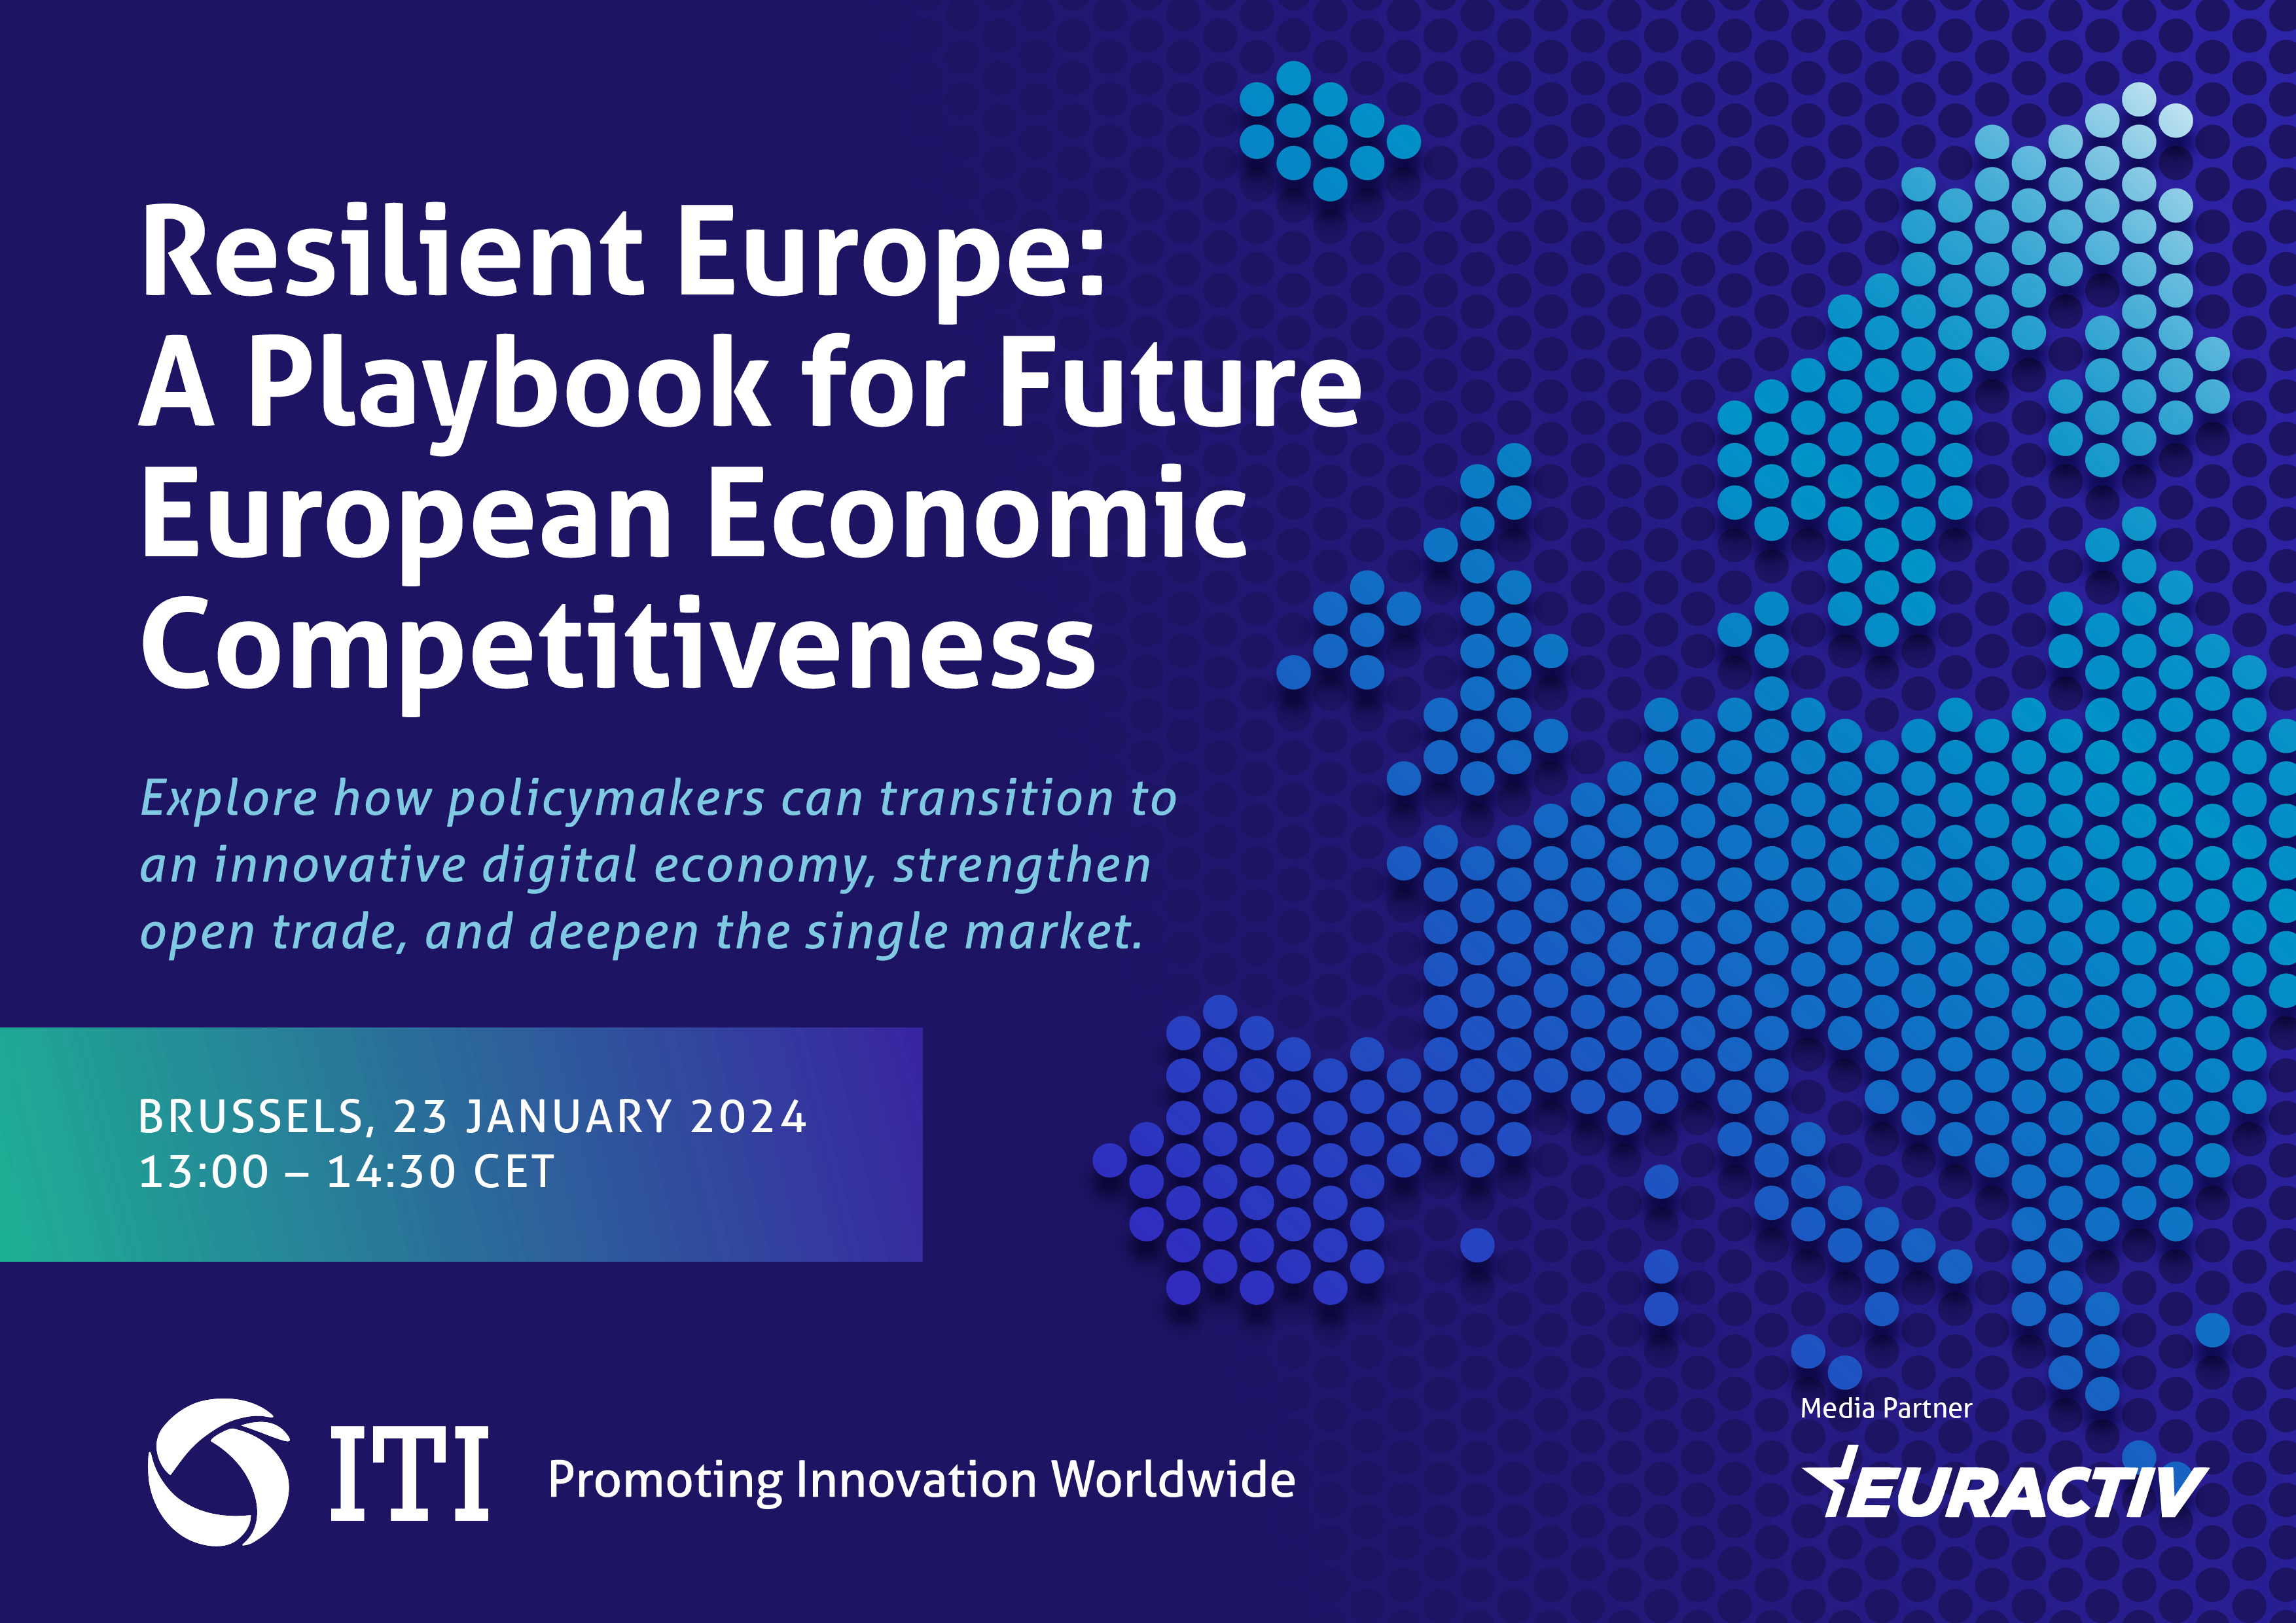 Media Partnership - Resilient Europe: A Playbook for Future European Economic Competitiveness